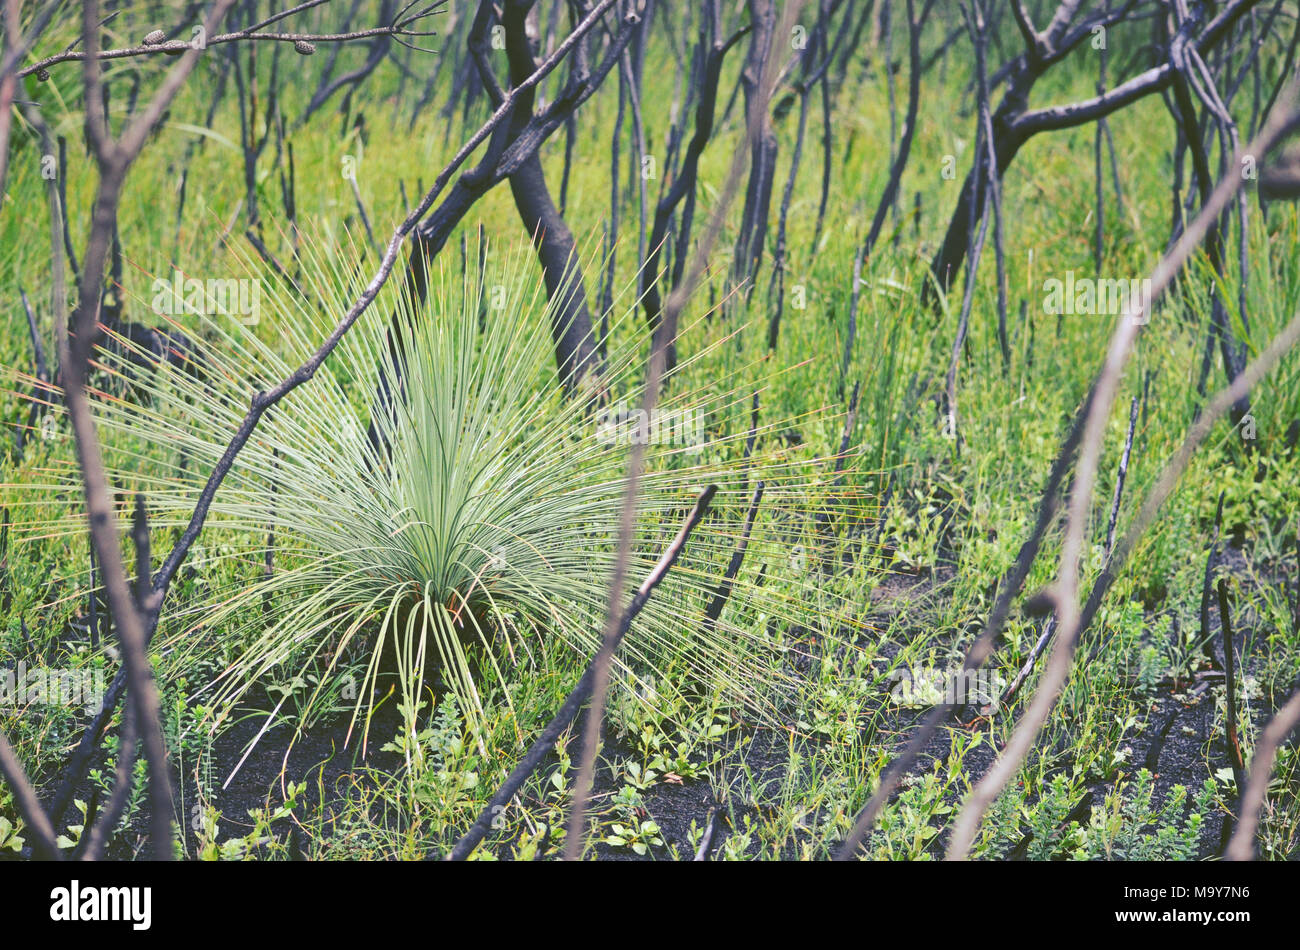 Regrowth of an Australian grass tree, Xanthorrhoea, amongst blackened trees after a bushfire in heathland in Kamay Botany Bay National Park, NSW, Aust Stock Photo